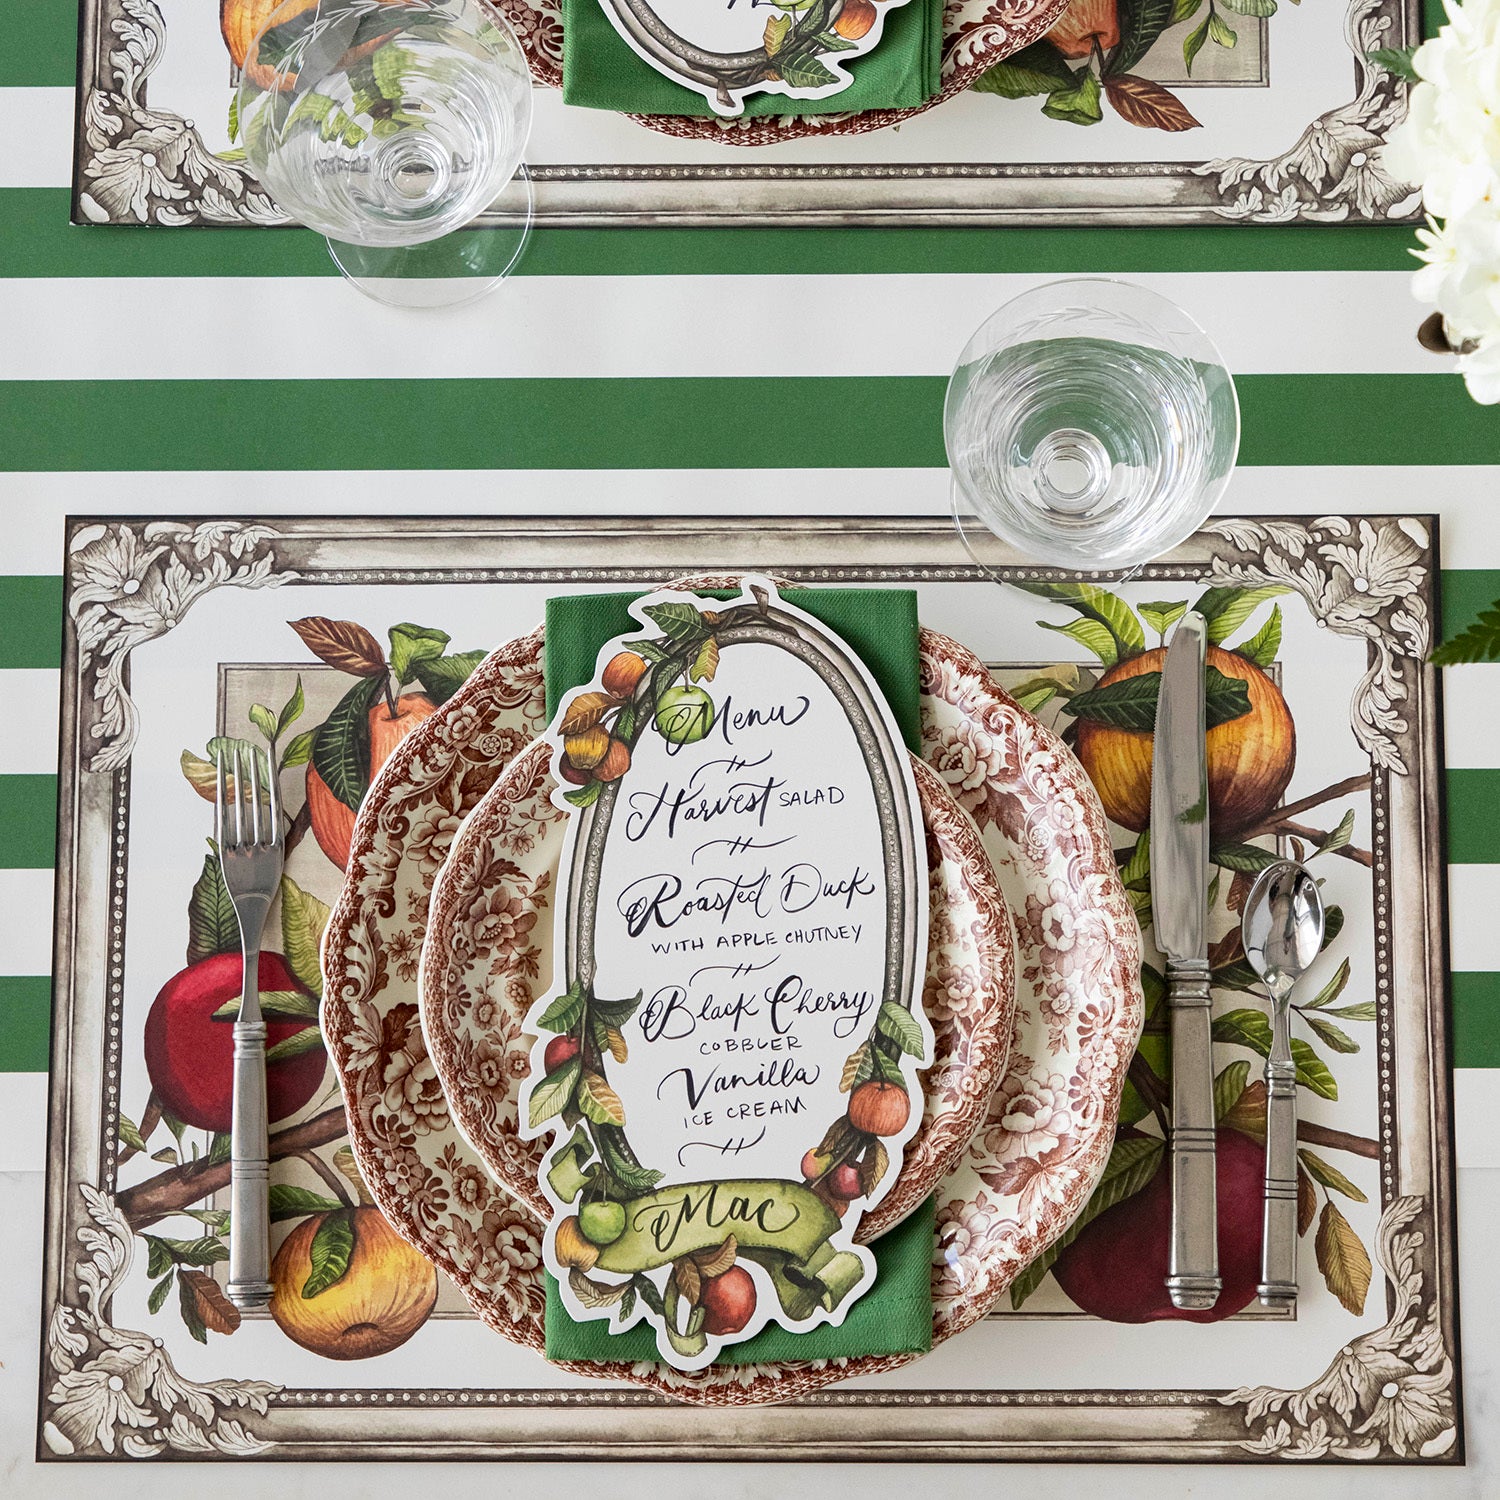 A Heirloom Apples Table Card with a menu written inside the frame and &quot;Mac&quot; written on the ribbon, resting on the plate of an elegant place setting, from above.